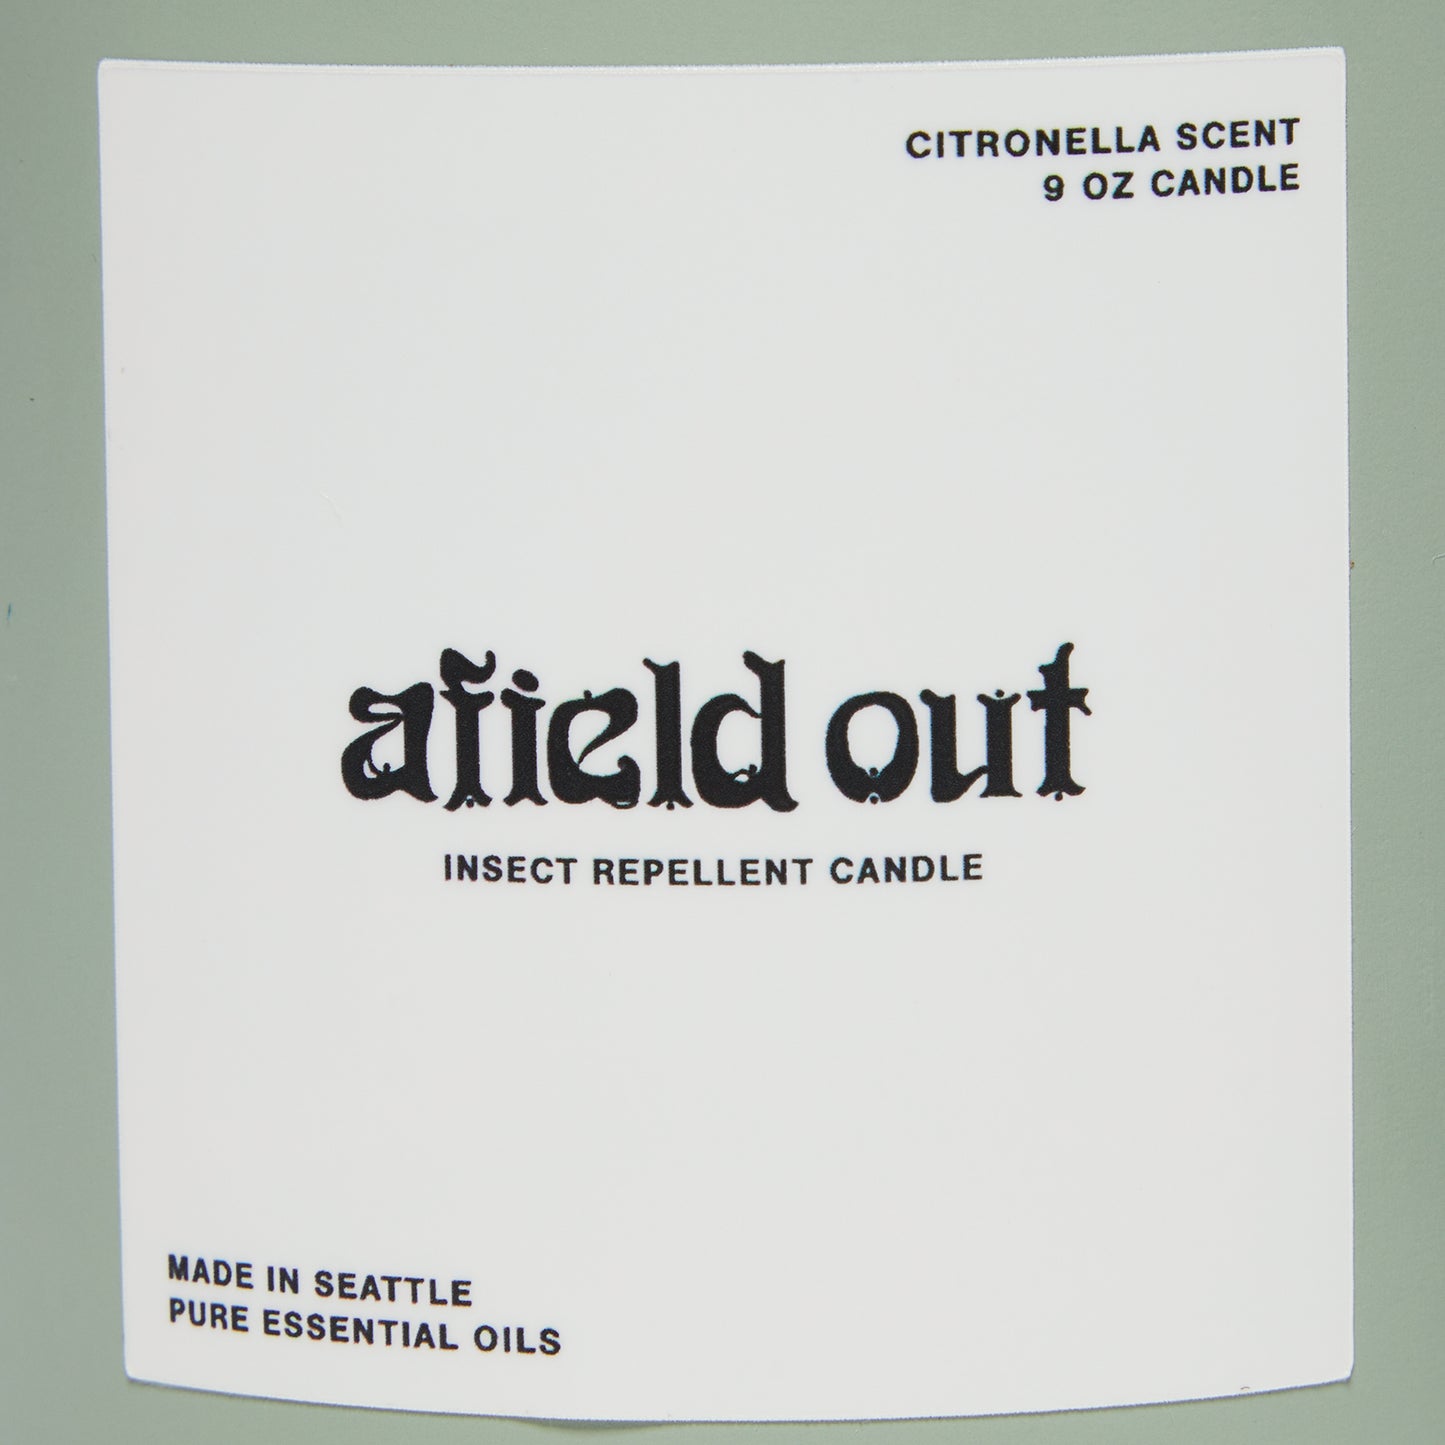 Afield Out Citronella Candle (Sage)